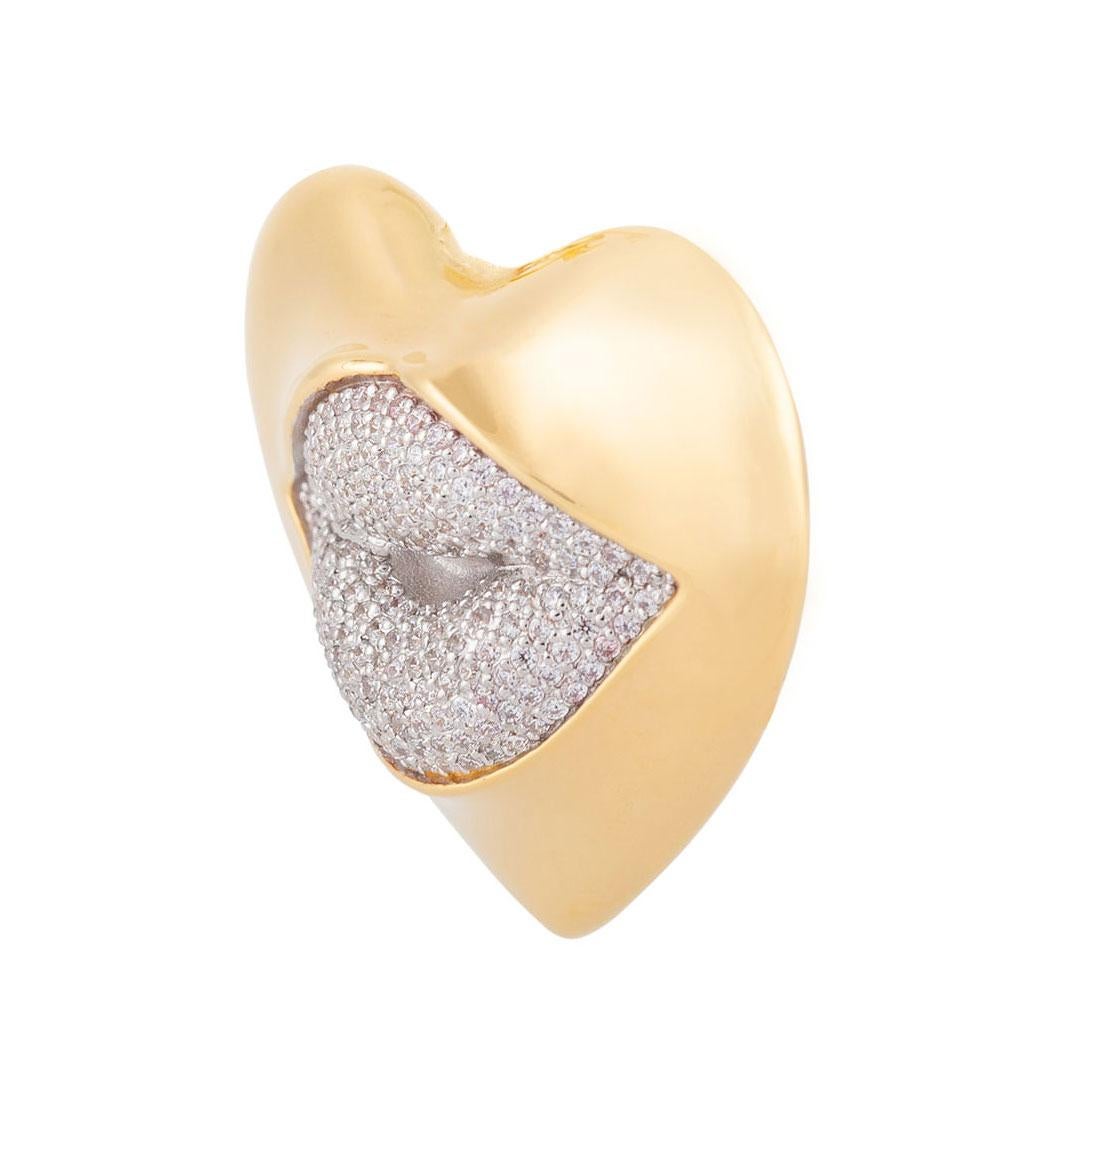 Love starts with the heart and lasts on the lips. These might be the sexiest earrings ever! Our sexy gold statement heart earrings with diamond kisses. Shine your love on!

Composition: Sterling Silver, 18k gold vermeil and Rhodium plated.
Color: